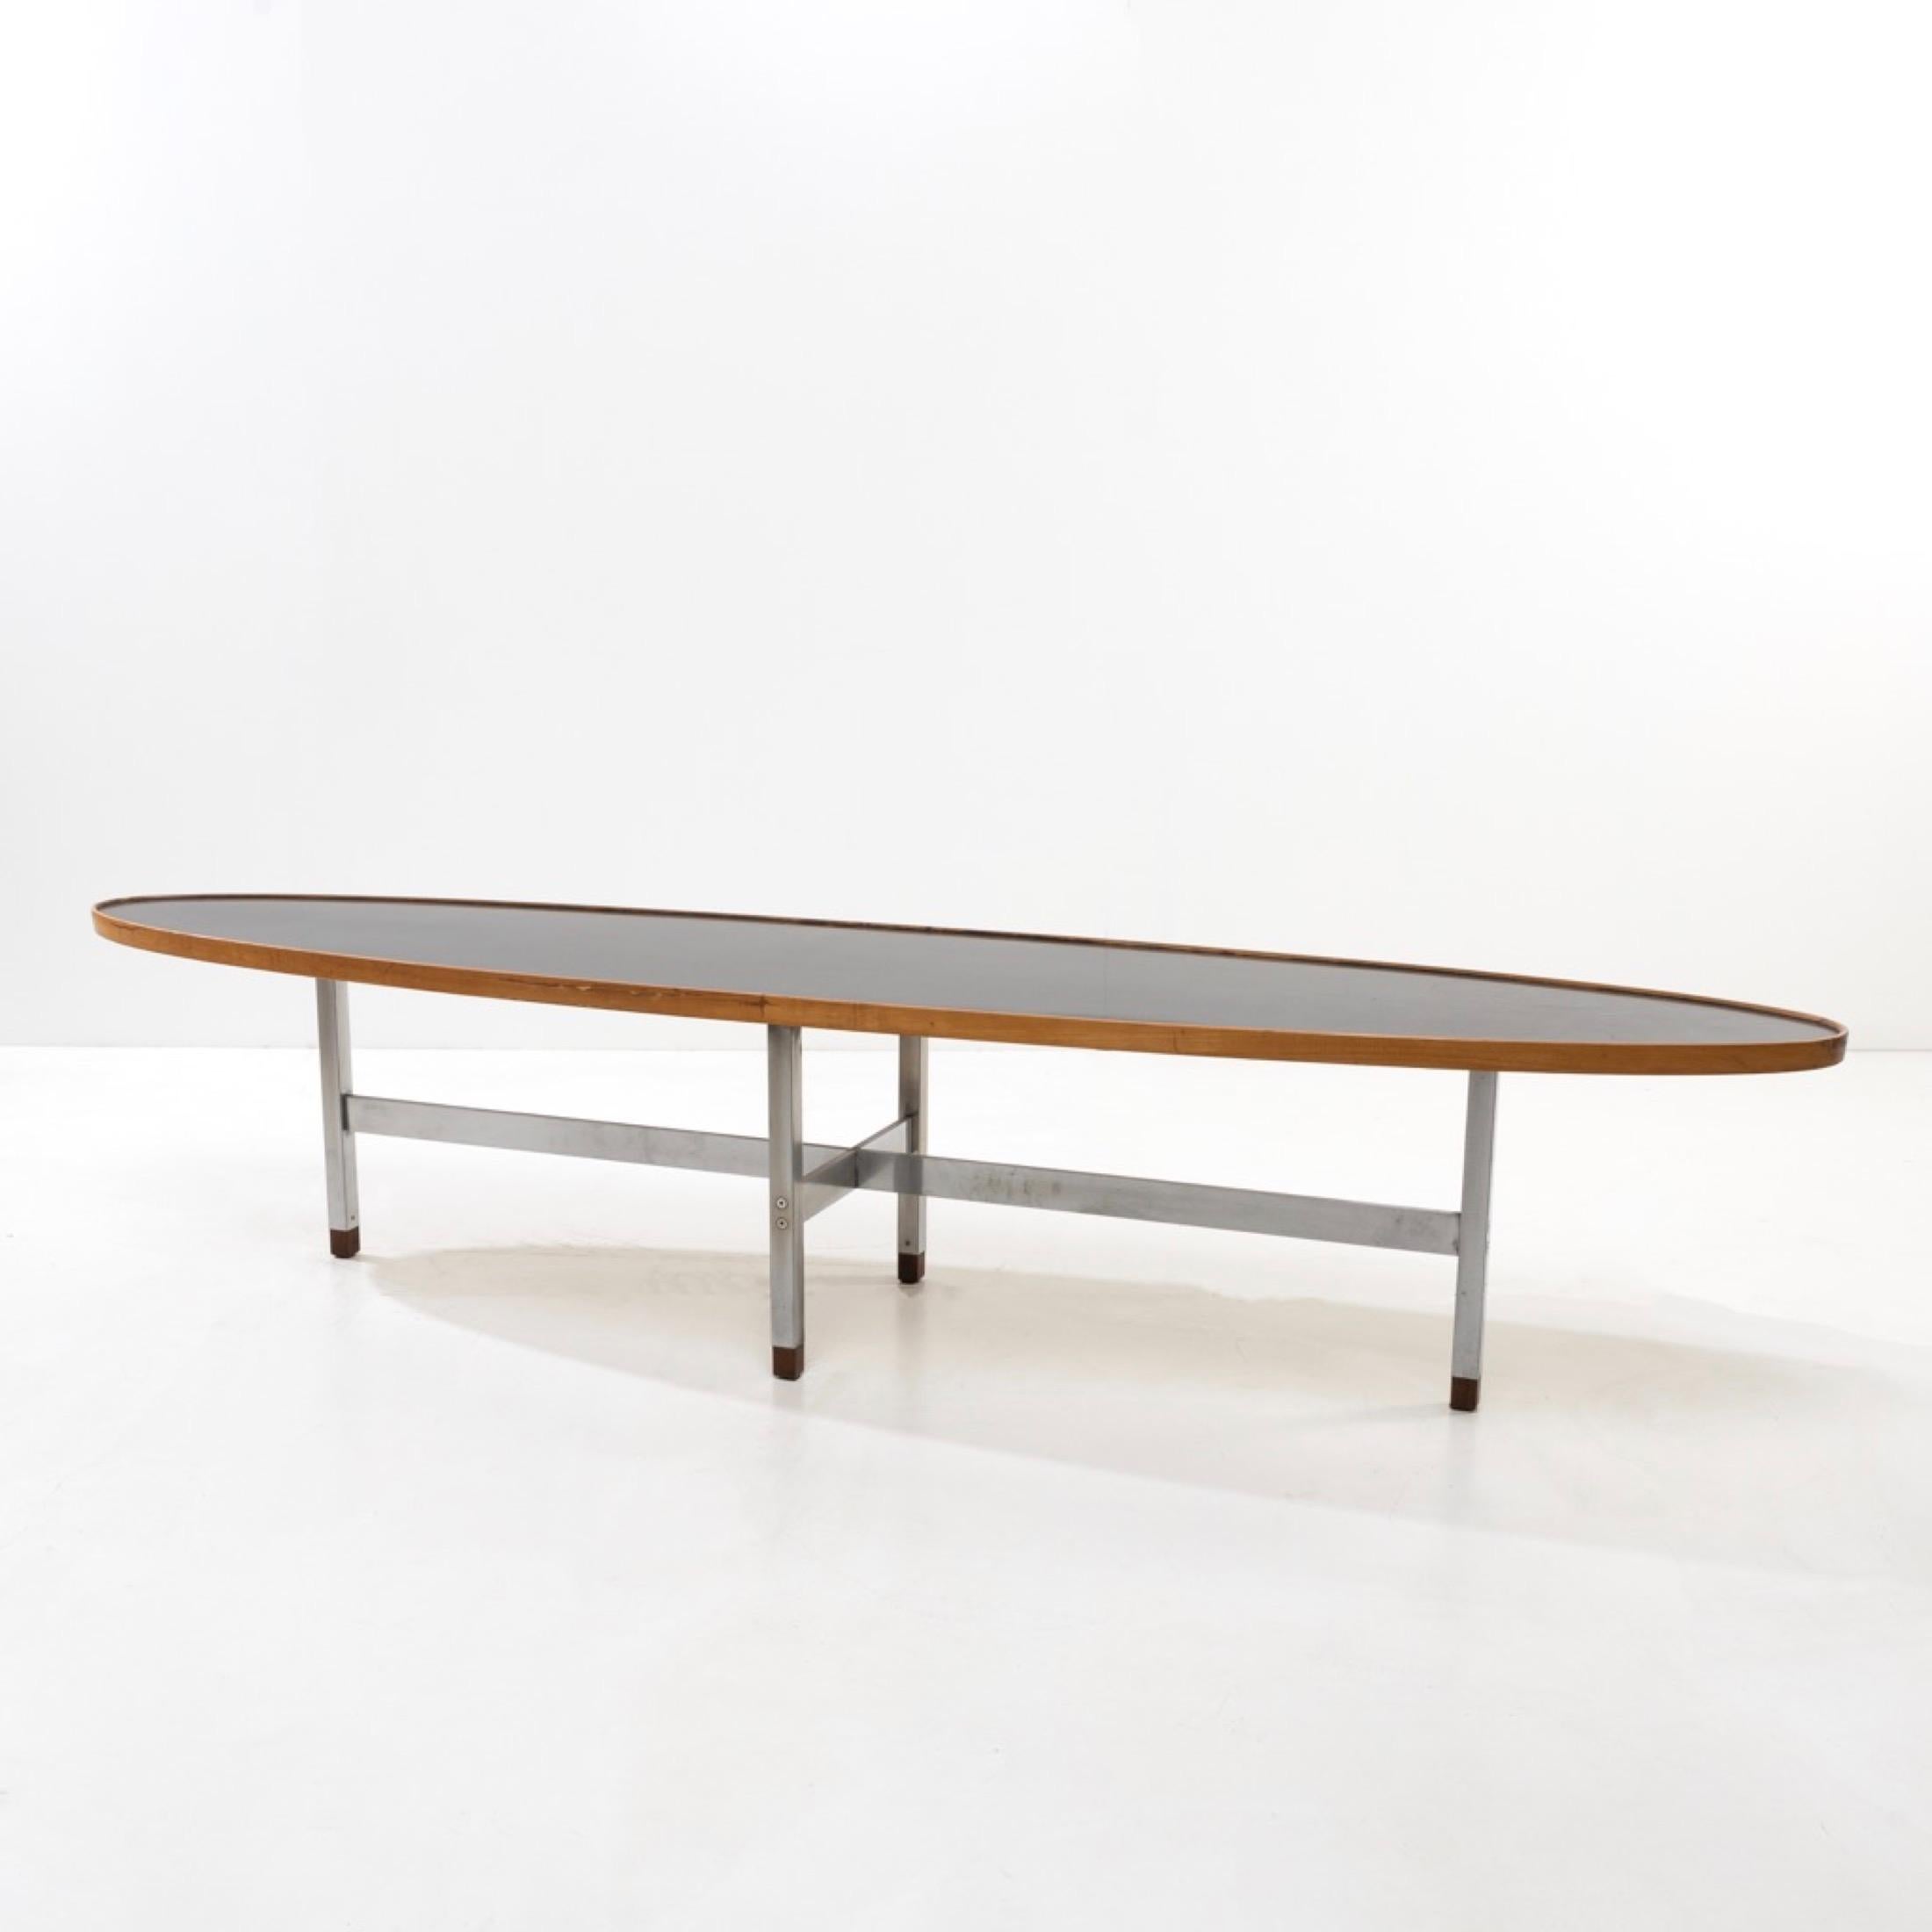 Large elliptical-shaped coffee table, the black laminate (formica) top surrounded by wood.
The top rests on four stainless steel legs with double spacers assembled by screws receiving wooden heels.